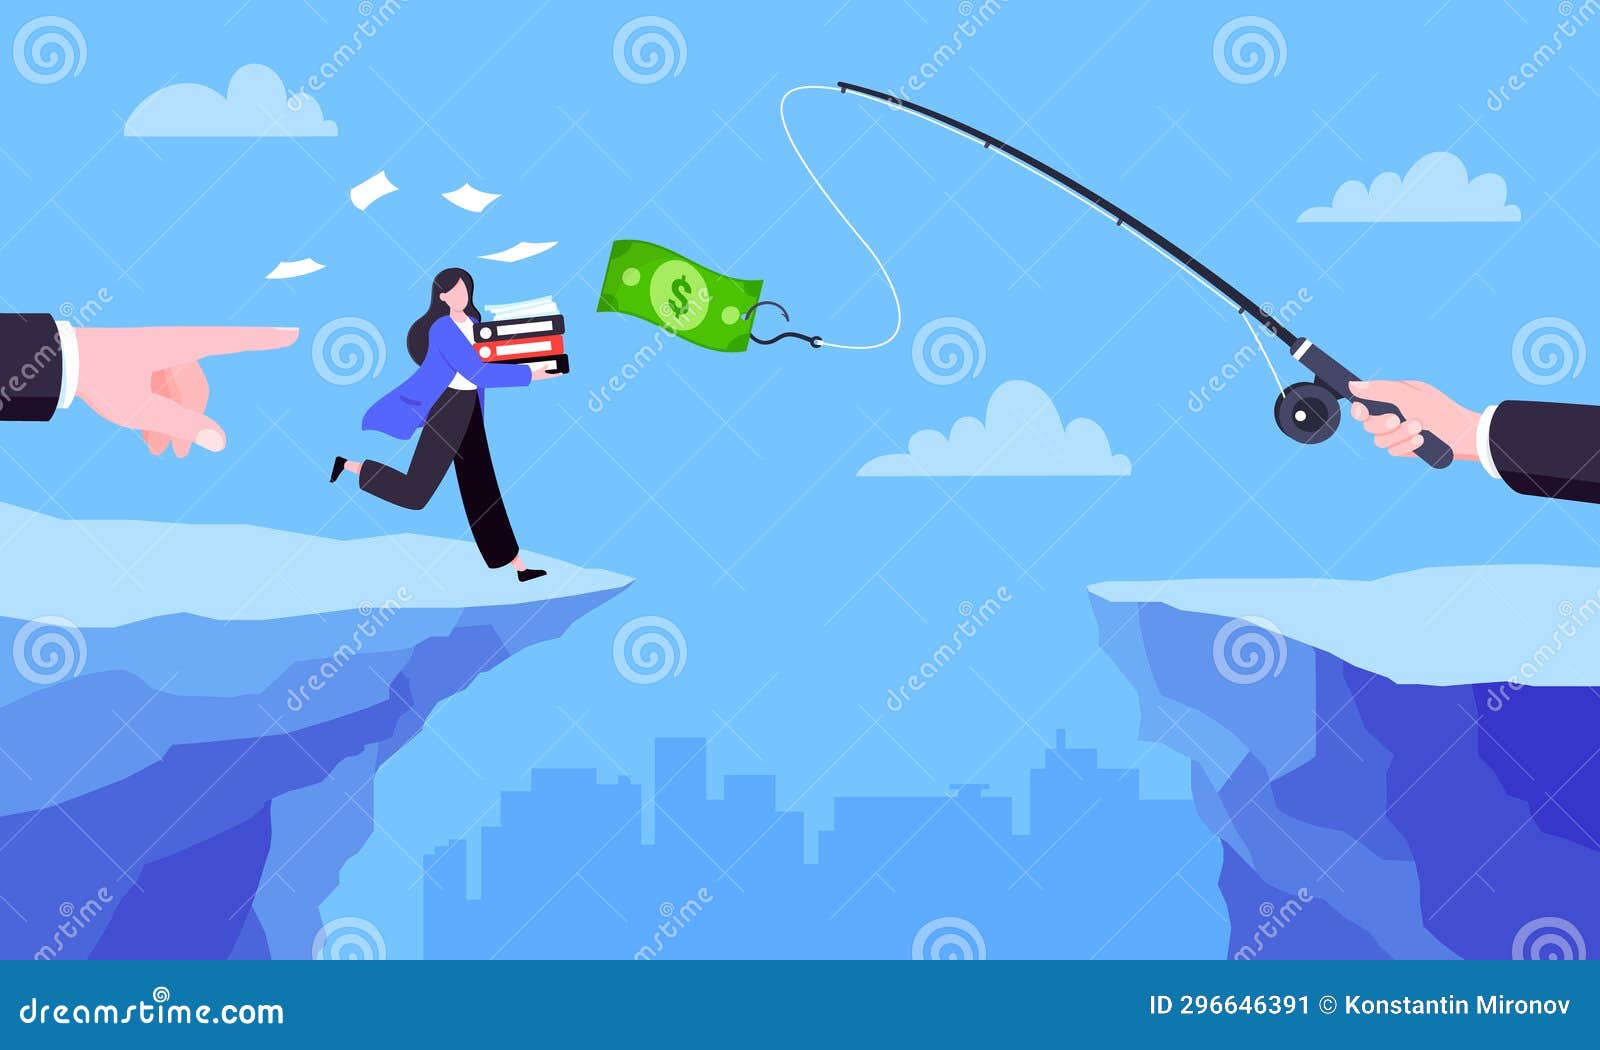 Fishing Money Chase Business Concept with Businesswoman Running after  Dangling Dollar Jumps Over the Cliff. Stock Vector - Illustration of  concept, hand: 296646391